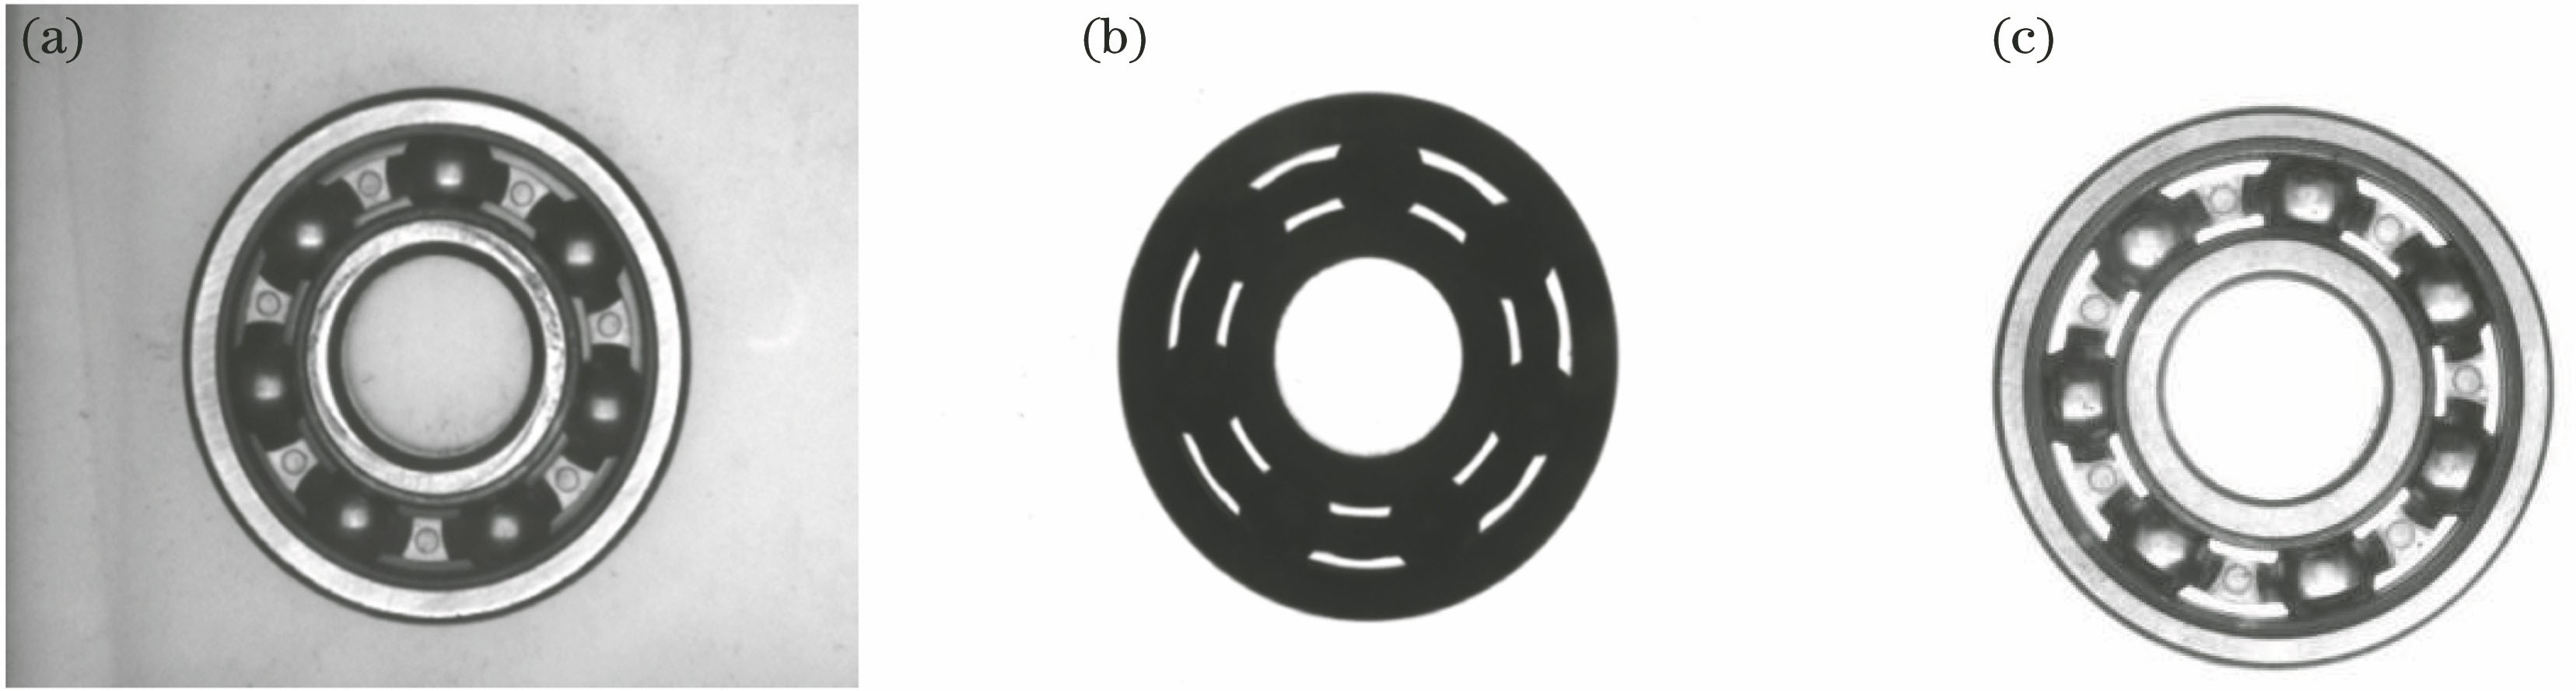 Obtained images under three lighting schemes. (a) Coaxial light source; (b) backlight source; (c) coaxial light source and backlight